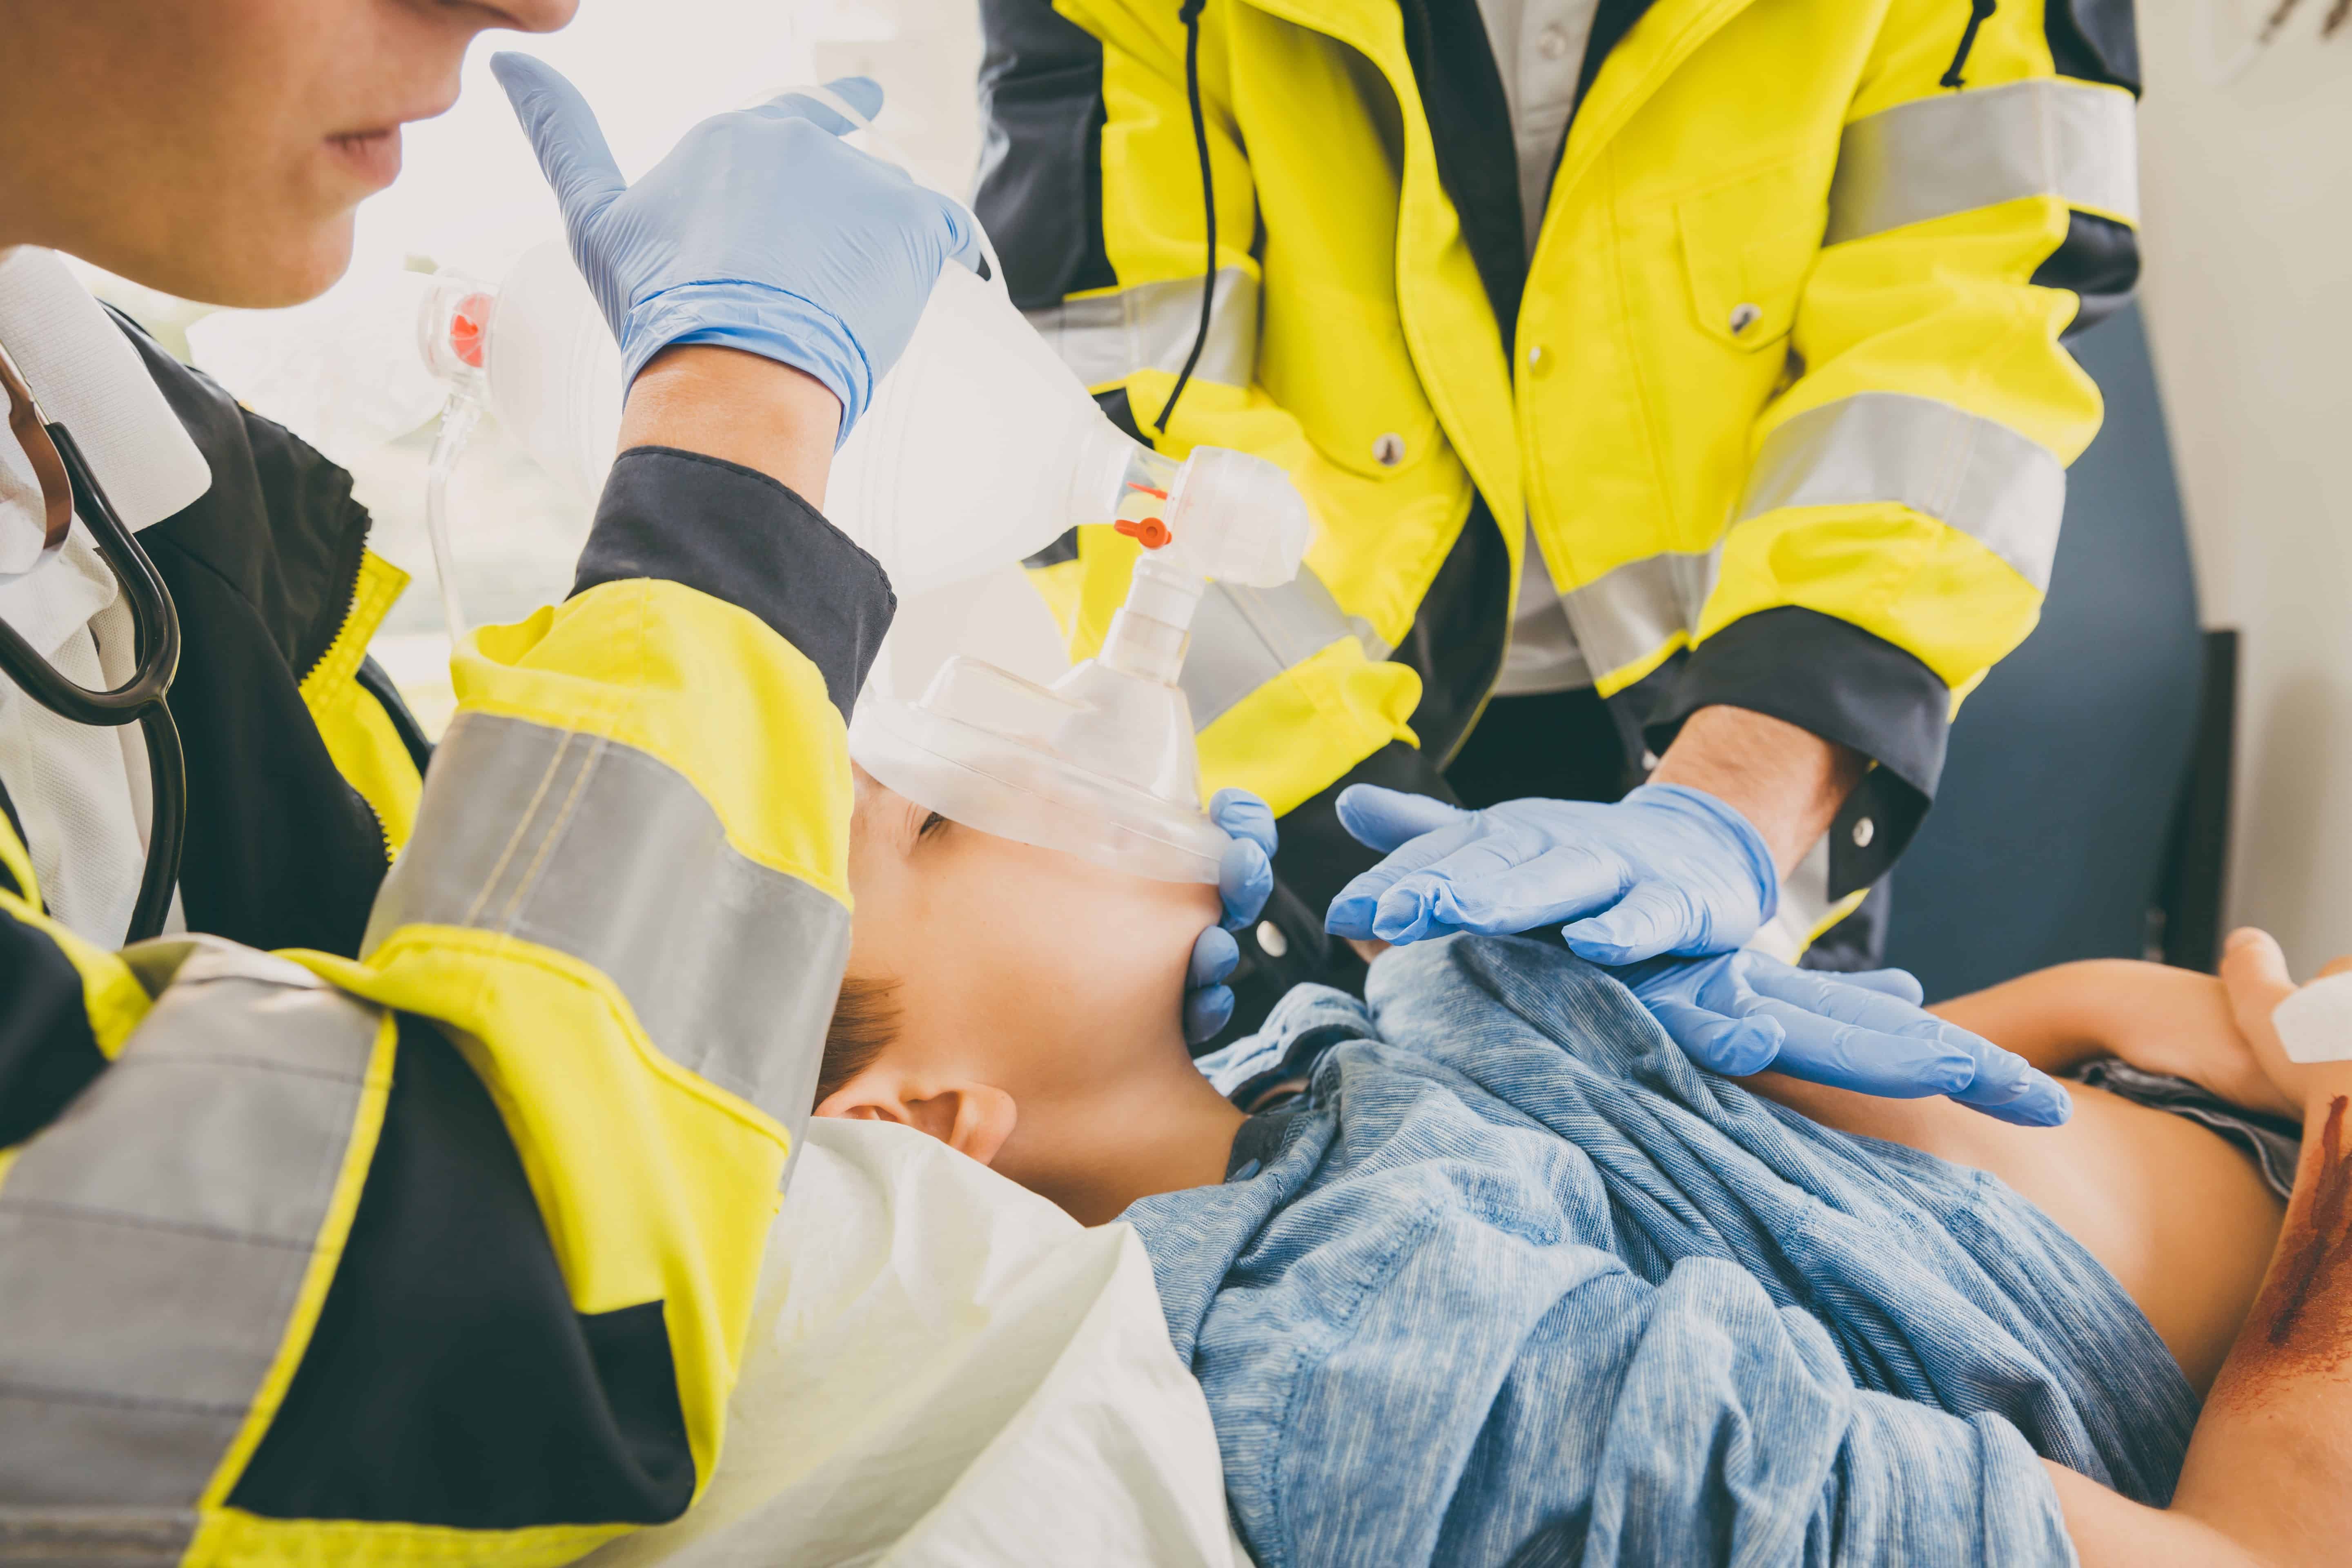 How to Use EMS to Treat Soft Tissue Injuries